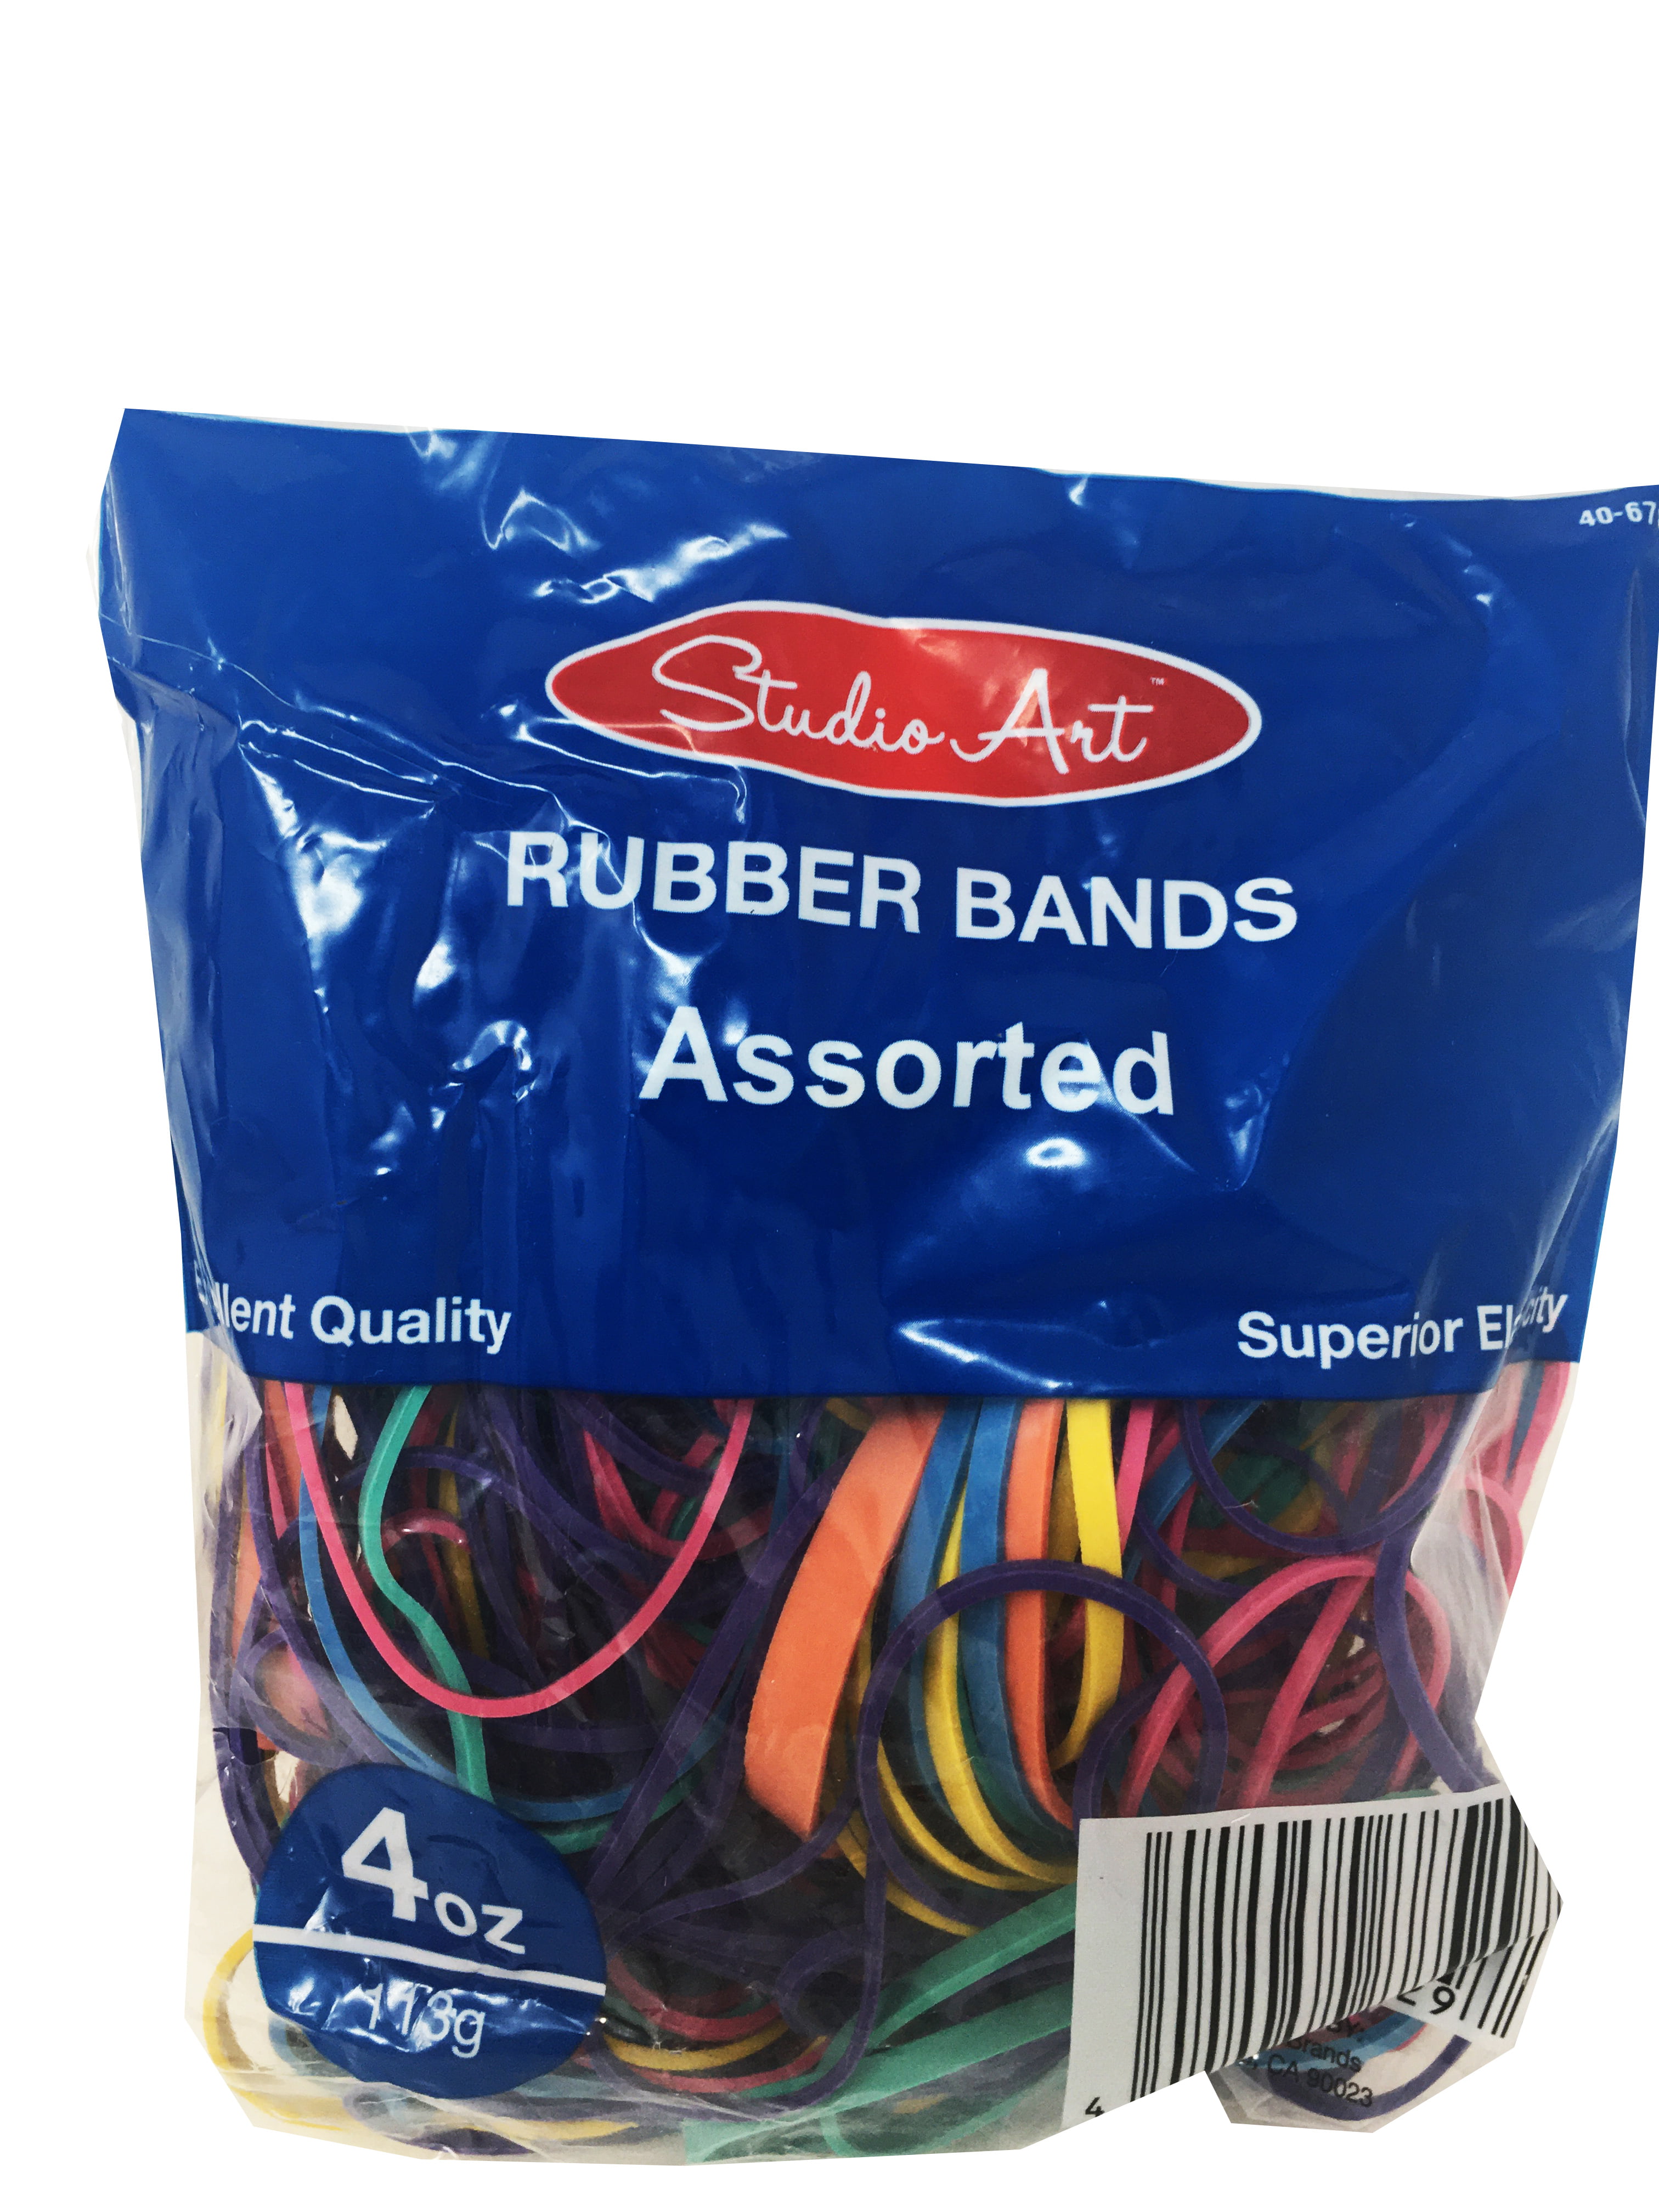 Studio Art Rubber Bands Assorted Colors 4 Oz Each pack of 2